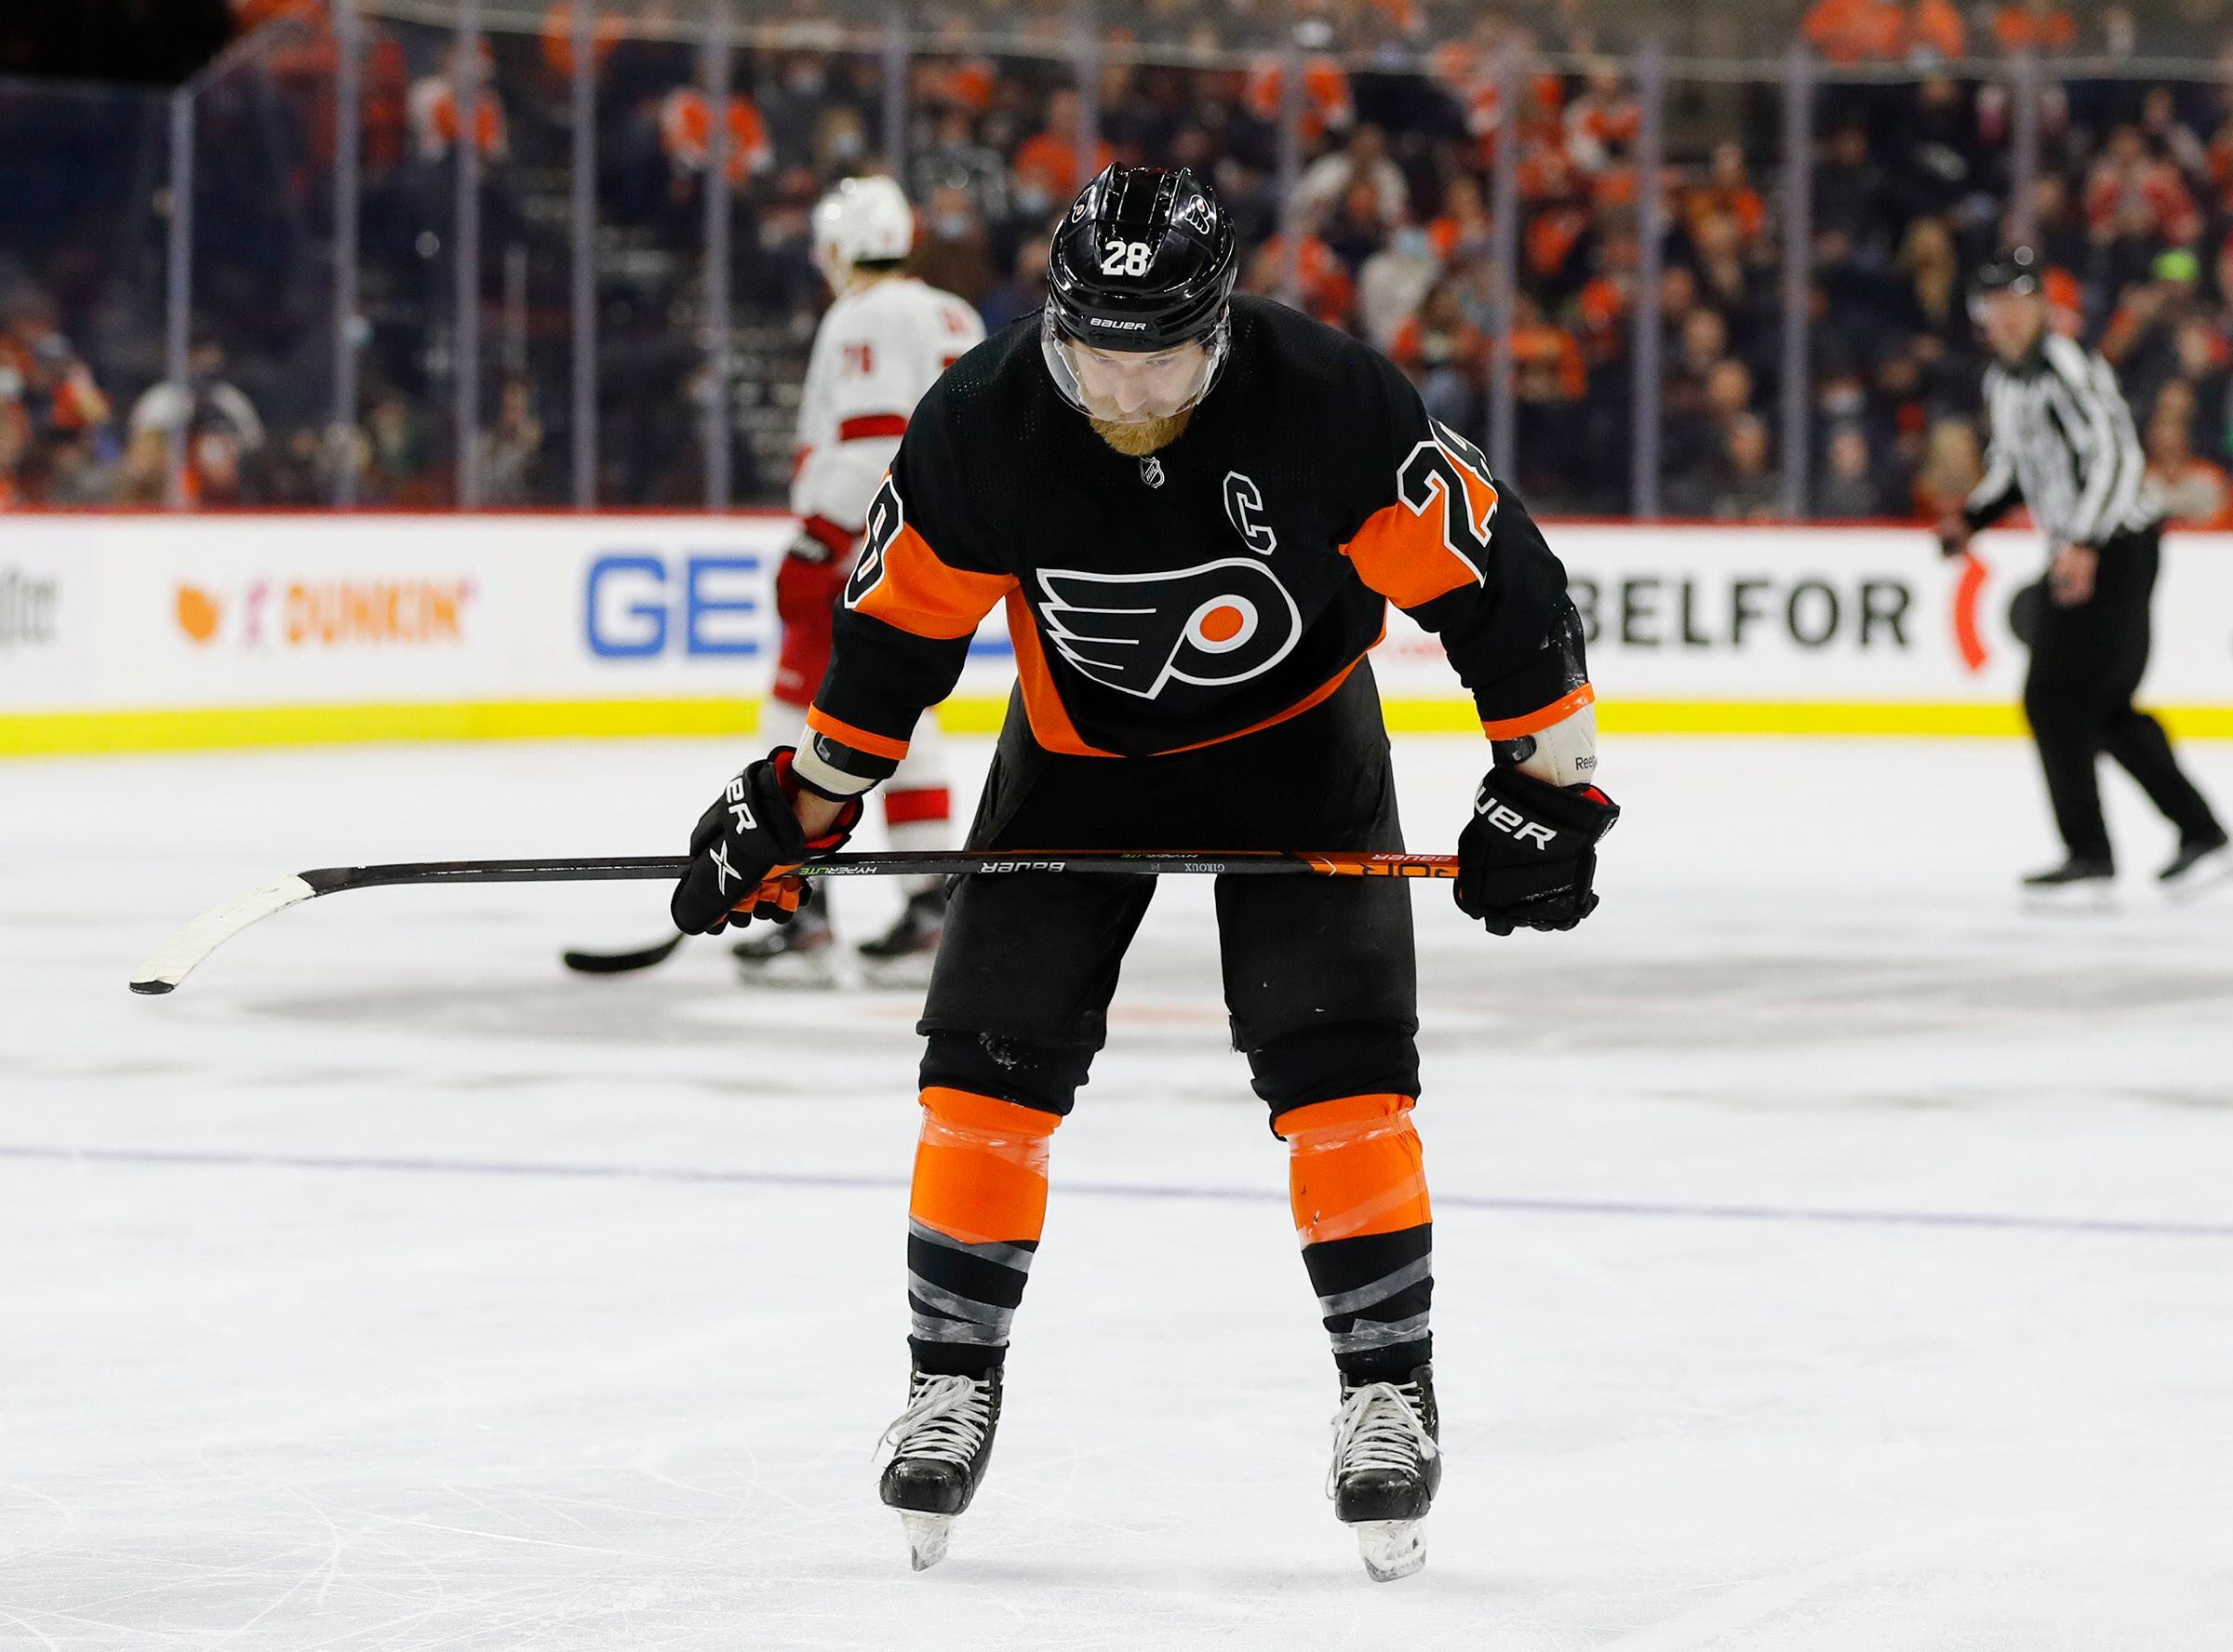 Flyers' Giroux Has Options to Consider as He Enters Contract Year